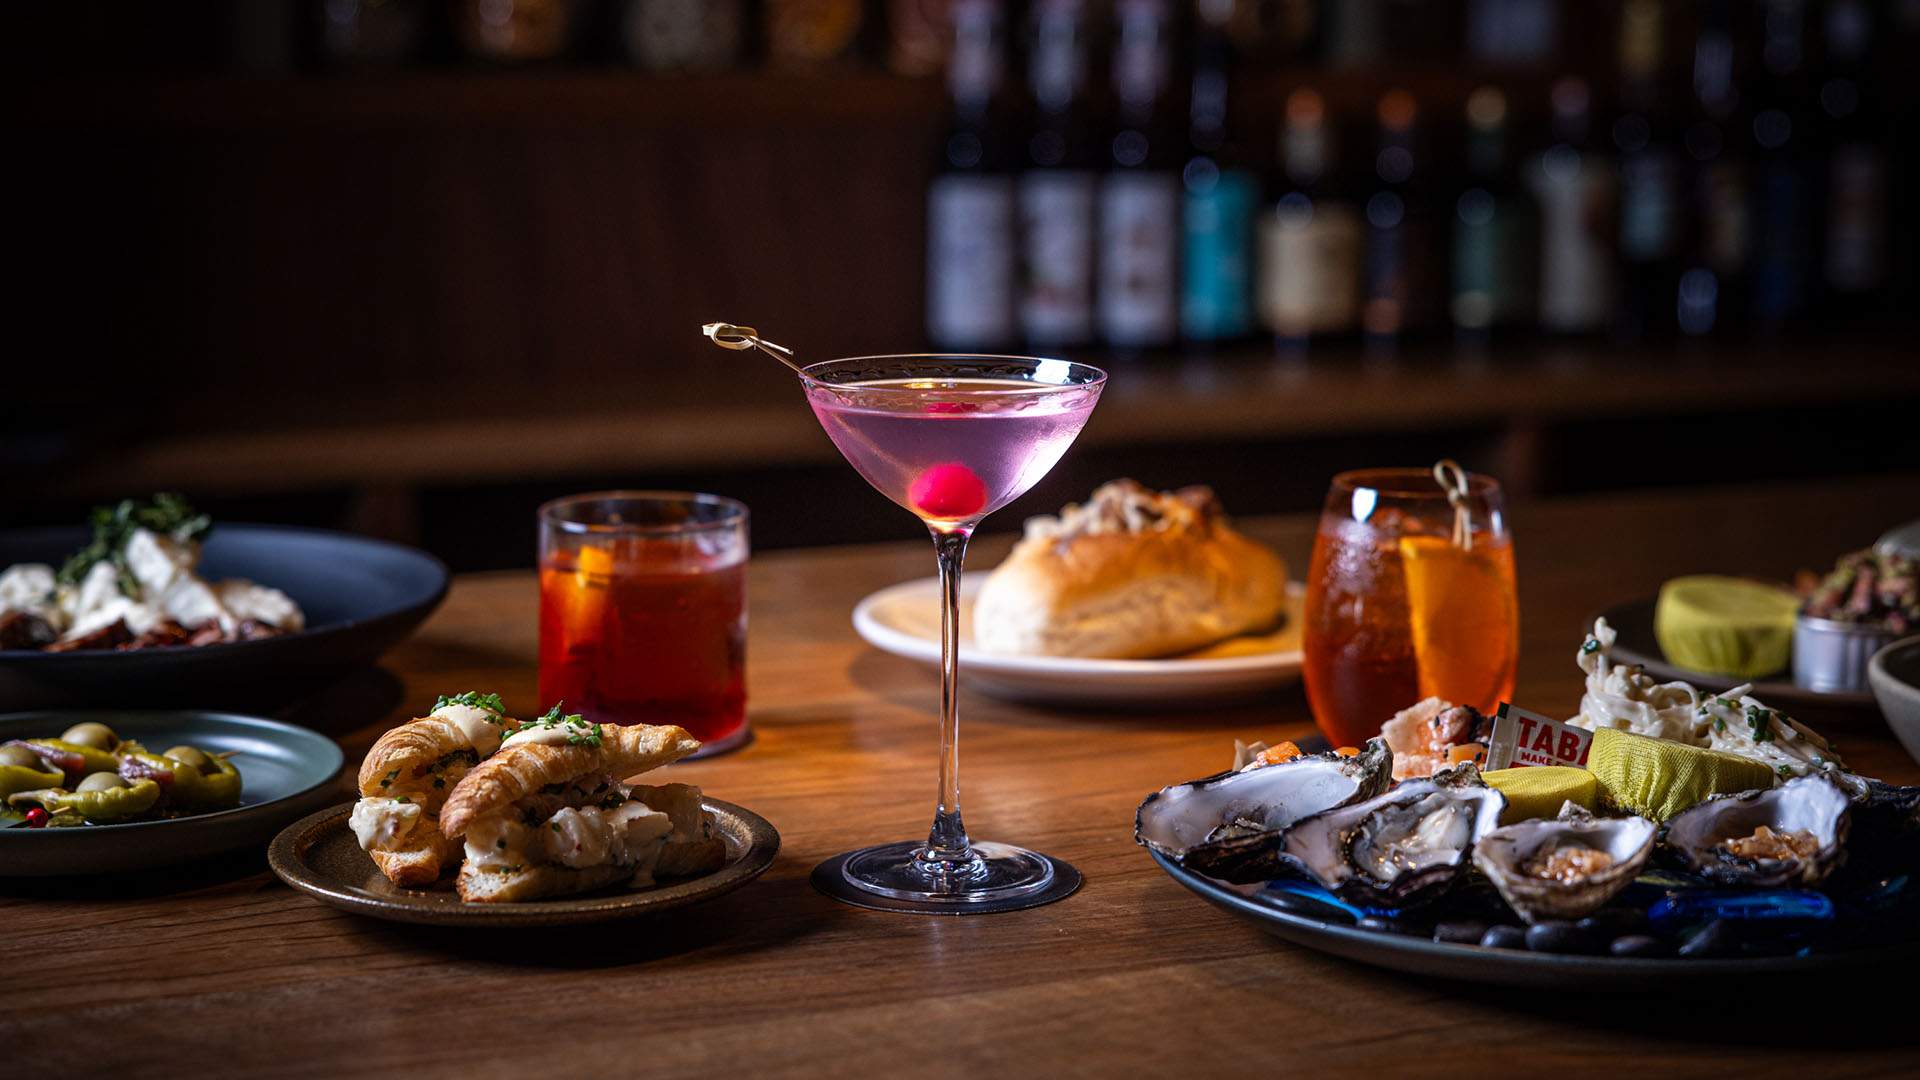 Midtown Is Fish Lane's Luxe New 40-Seater Martini Bar From the One Fish Two Fish Team